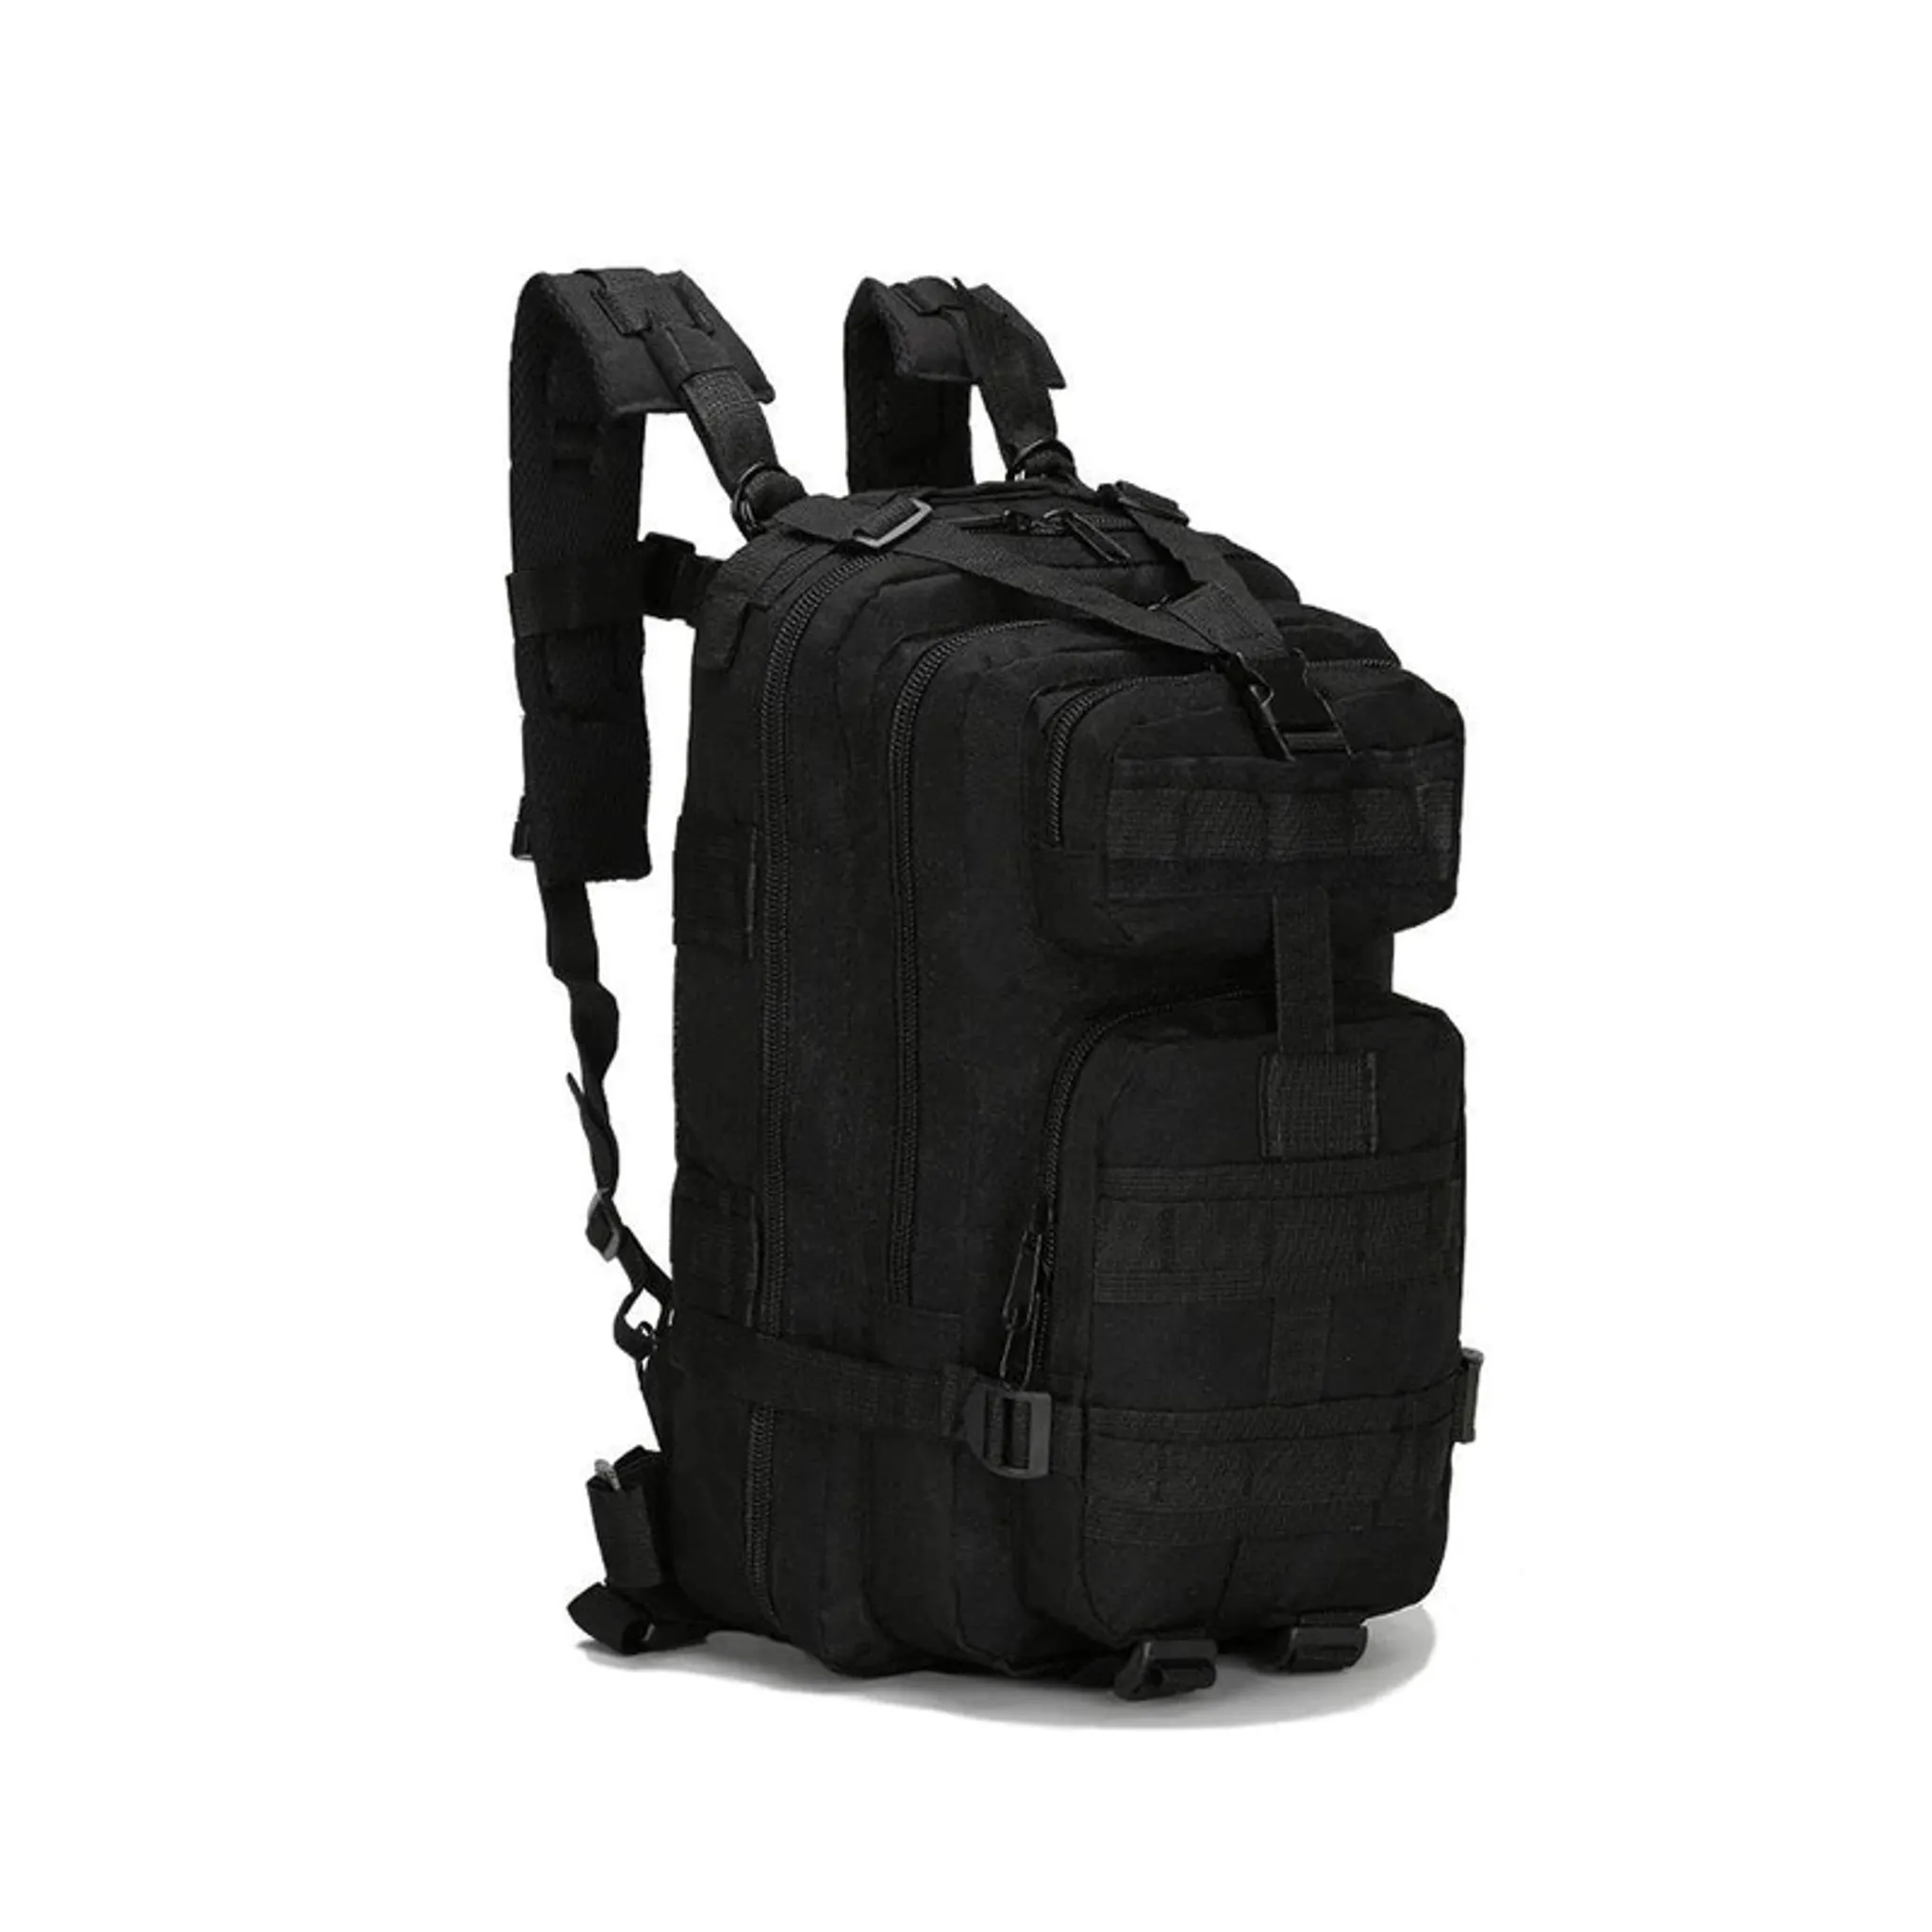 US ASSAULT PACK (30L) Molle Rucksack Army Day